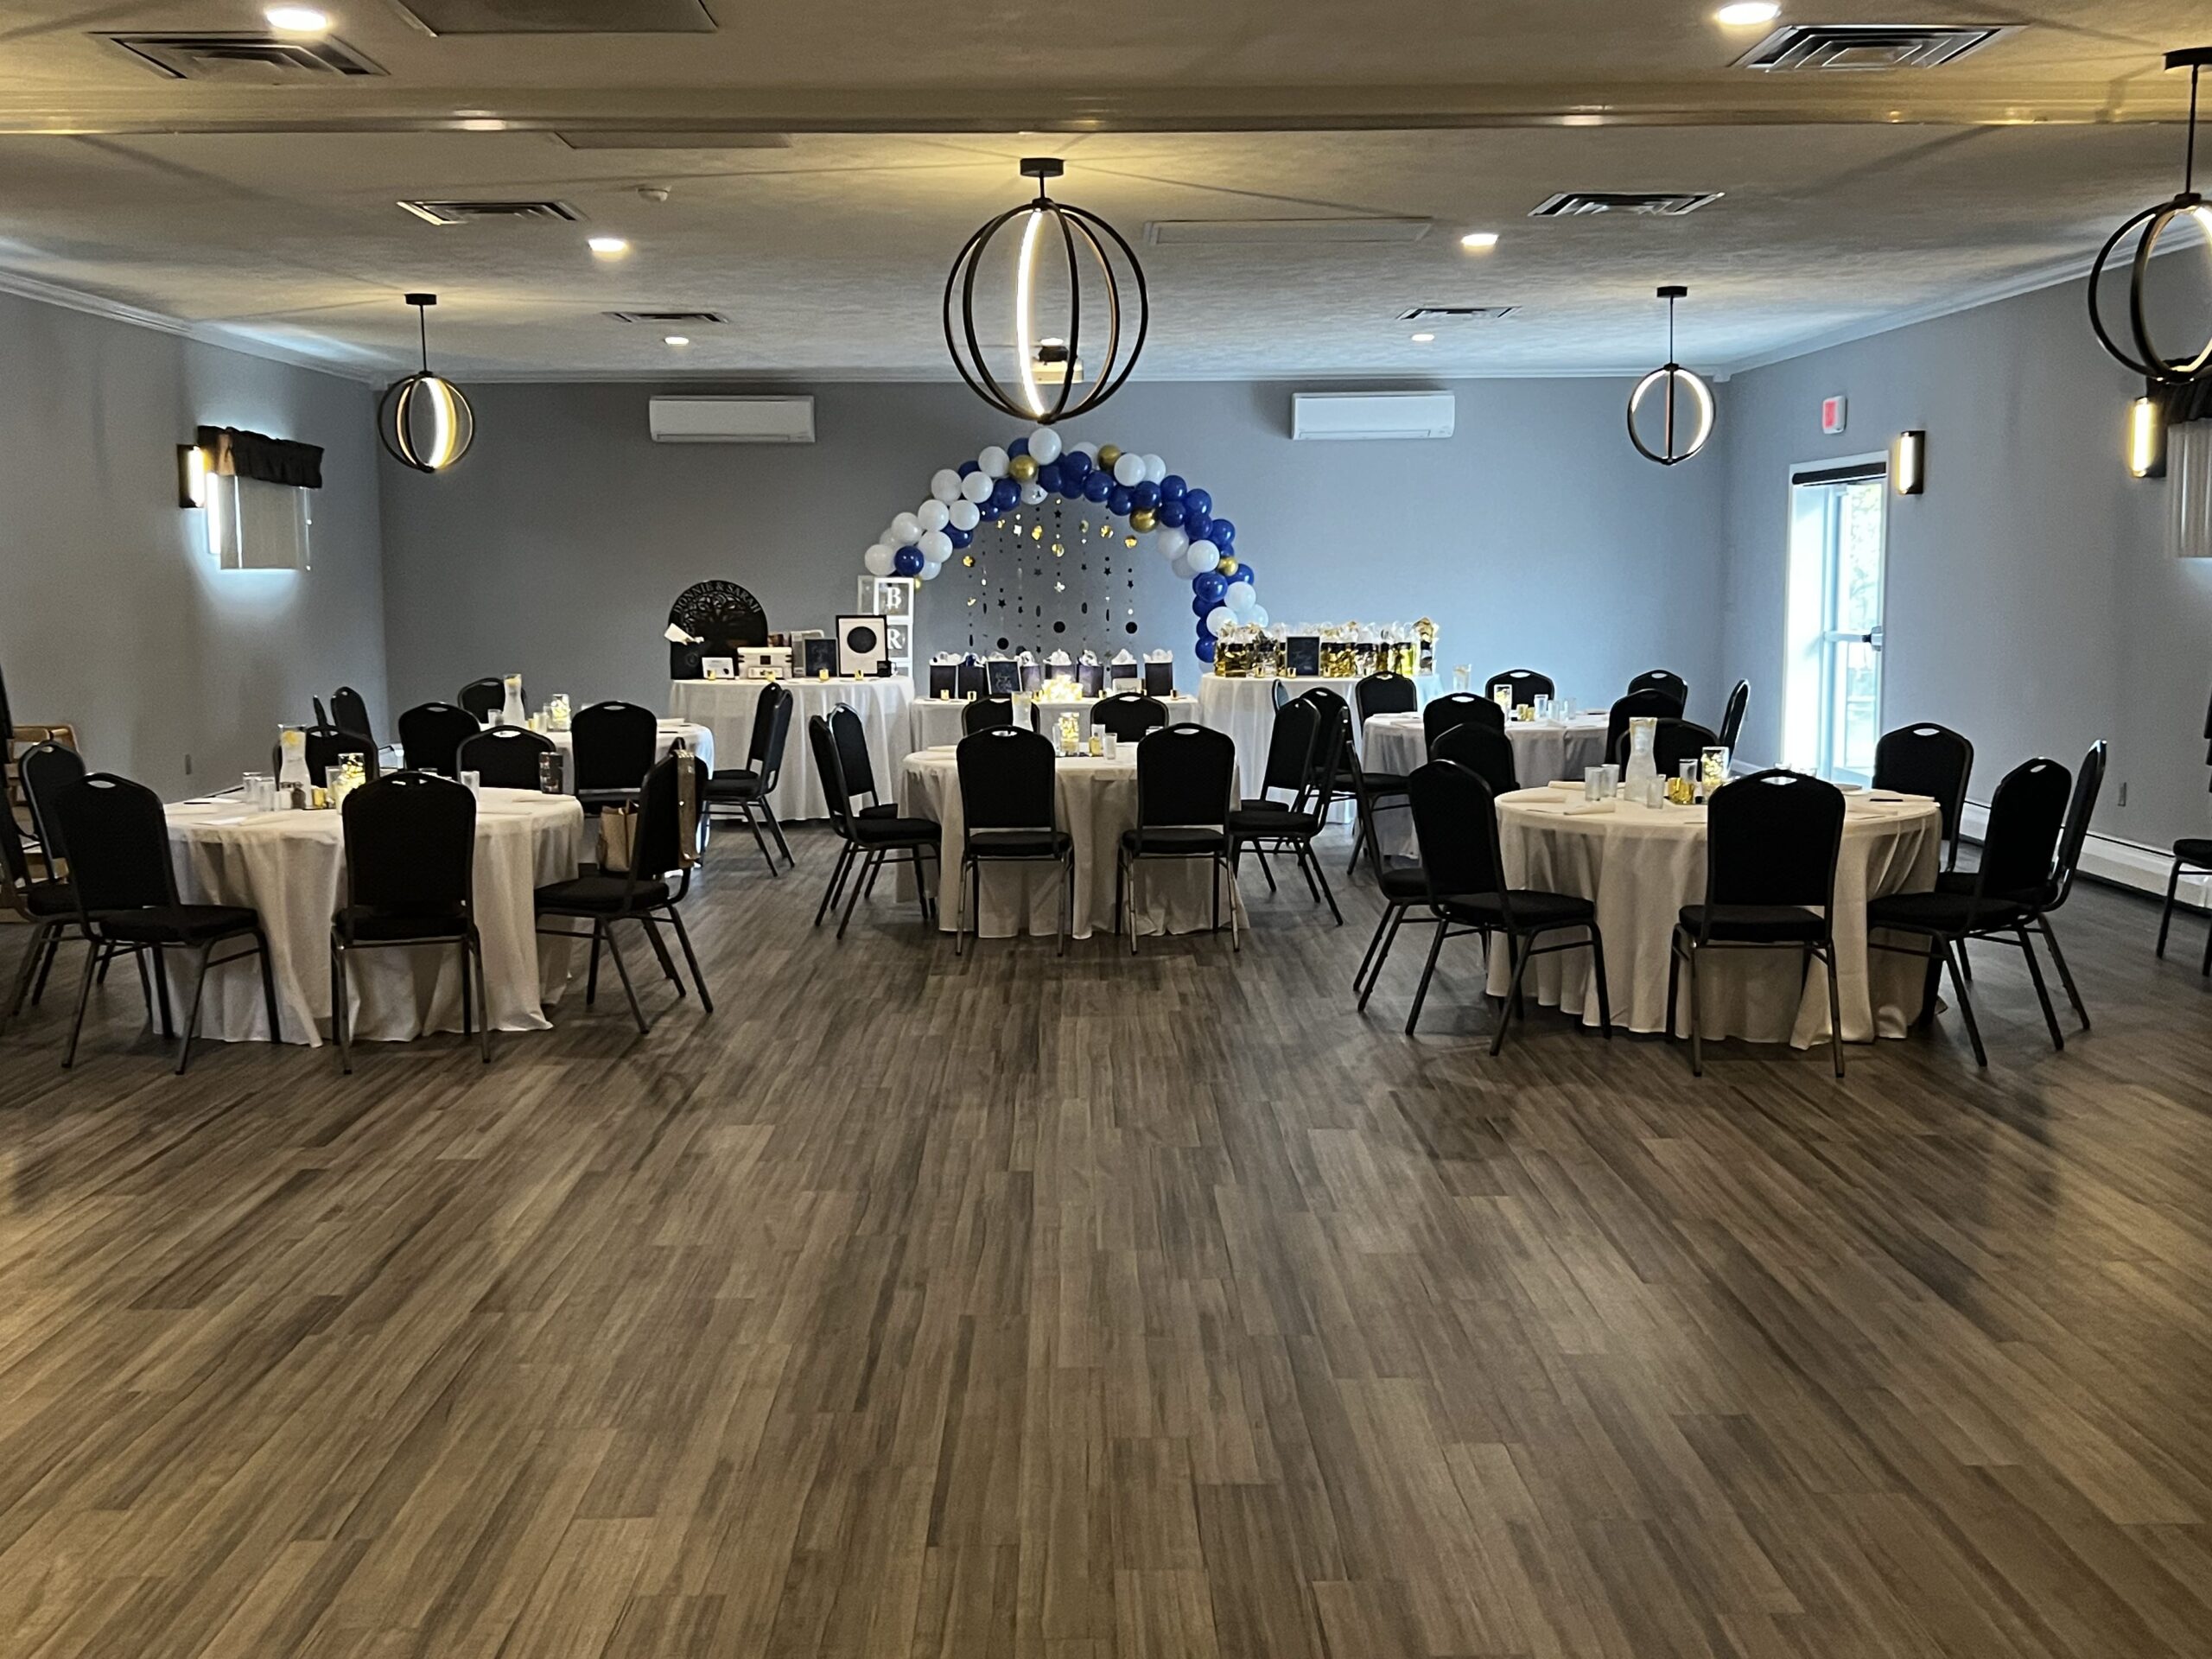 Large event hall with ash-wood floors set up for an event.